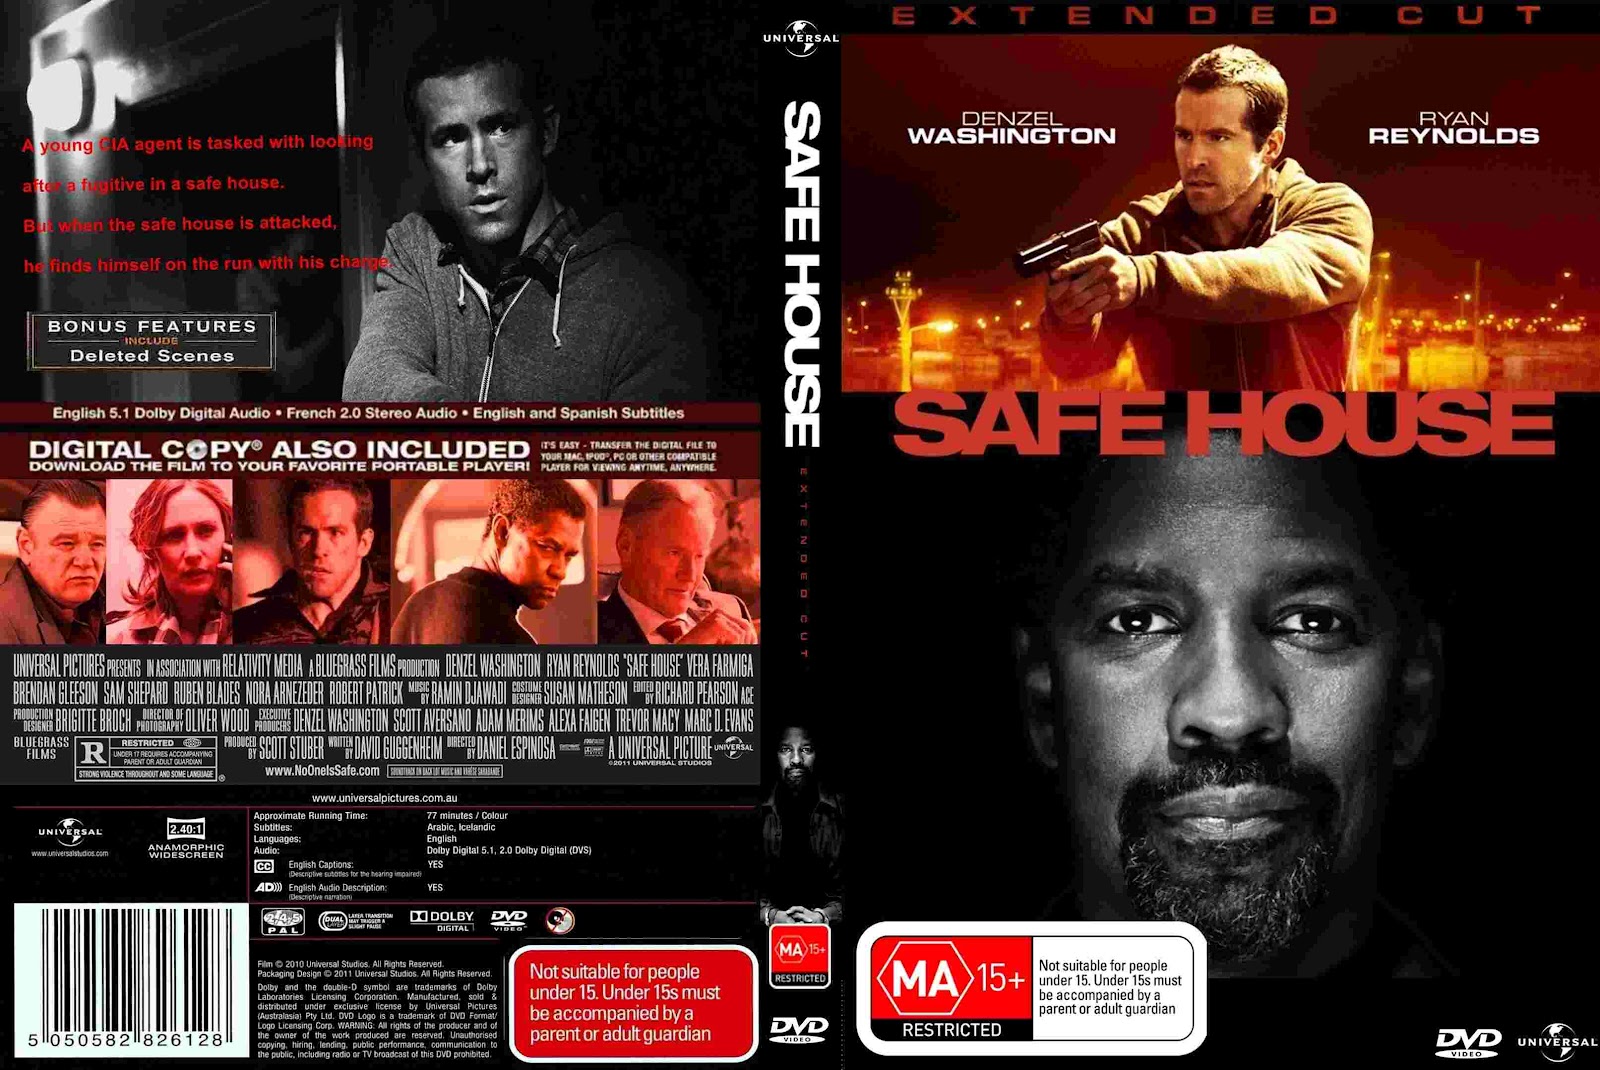 Safe house am. Safe House movie Cover. Safe House 2012 Cover BLURAY. Reb (safe House).